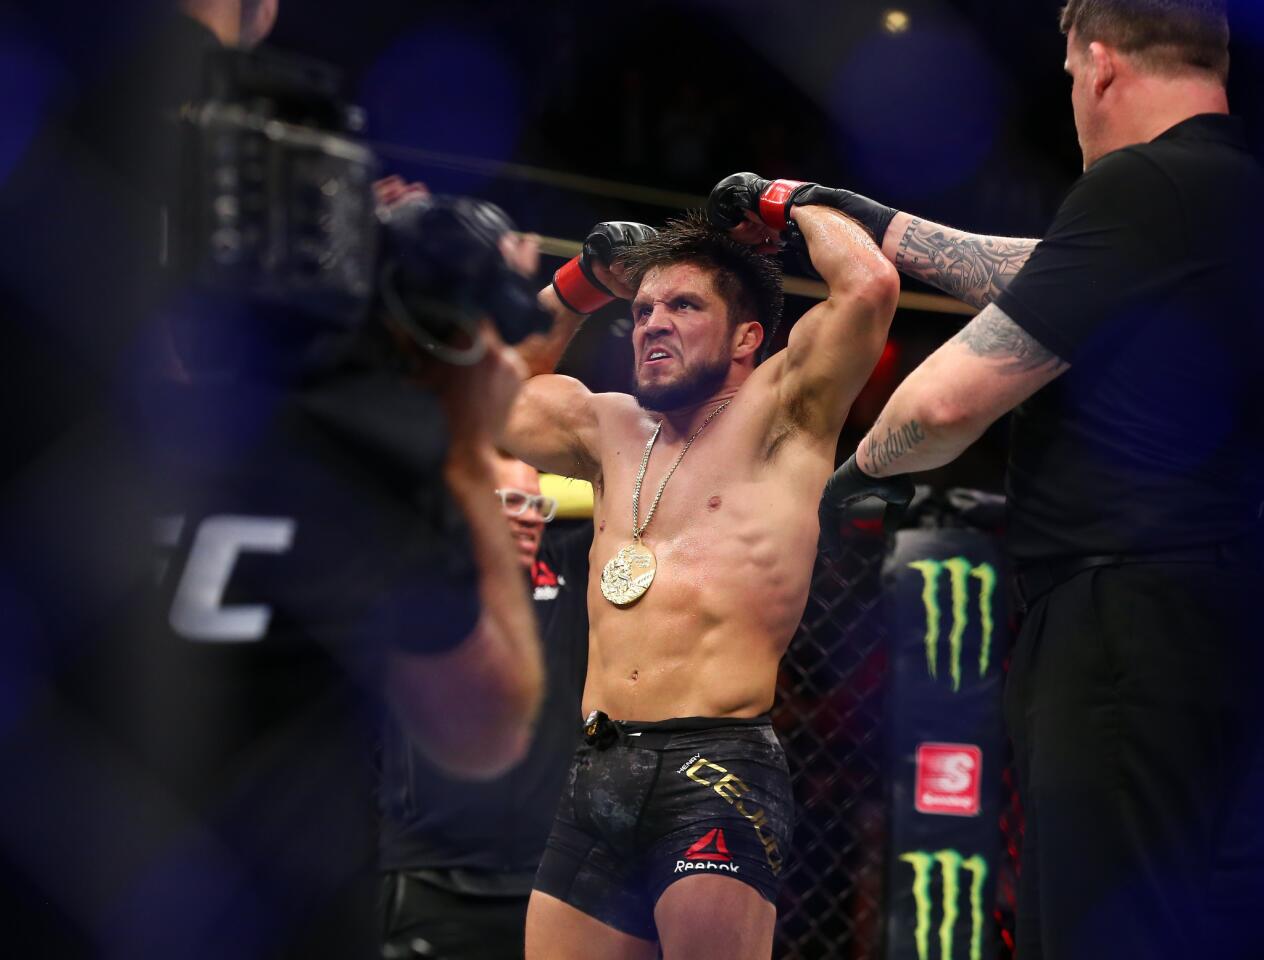 CHICAGO, IL - JUNE 08: Henry Cejudo celebrates his victory over Marlon Moraes of Brazil in their bantamweight championship bout during the UFC 238 event at United Center on June 8, 2019 in Chicago, Illinois. (Photo by Rey Del Rio/Getty Images) ** OUTS - ELSENT, FPG, CM - OUTS * NM, PH, VA if sourced by CT, LA or MoD **